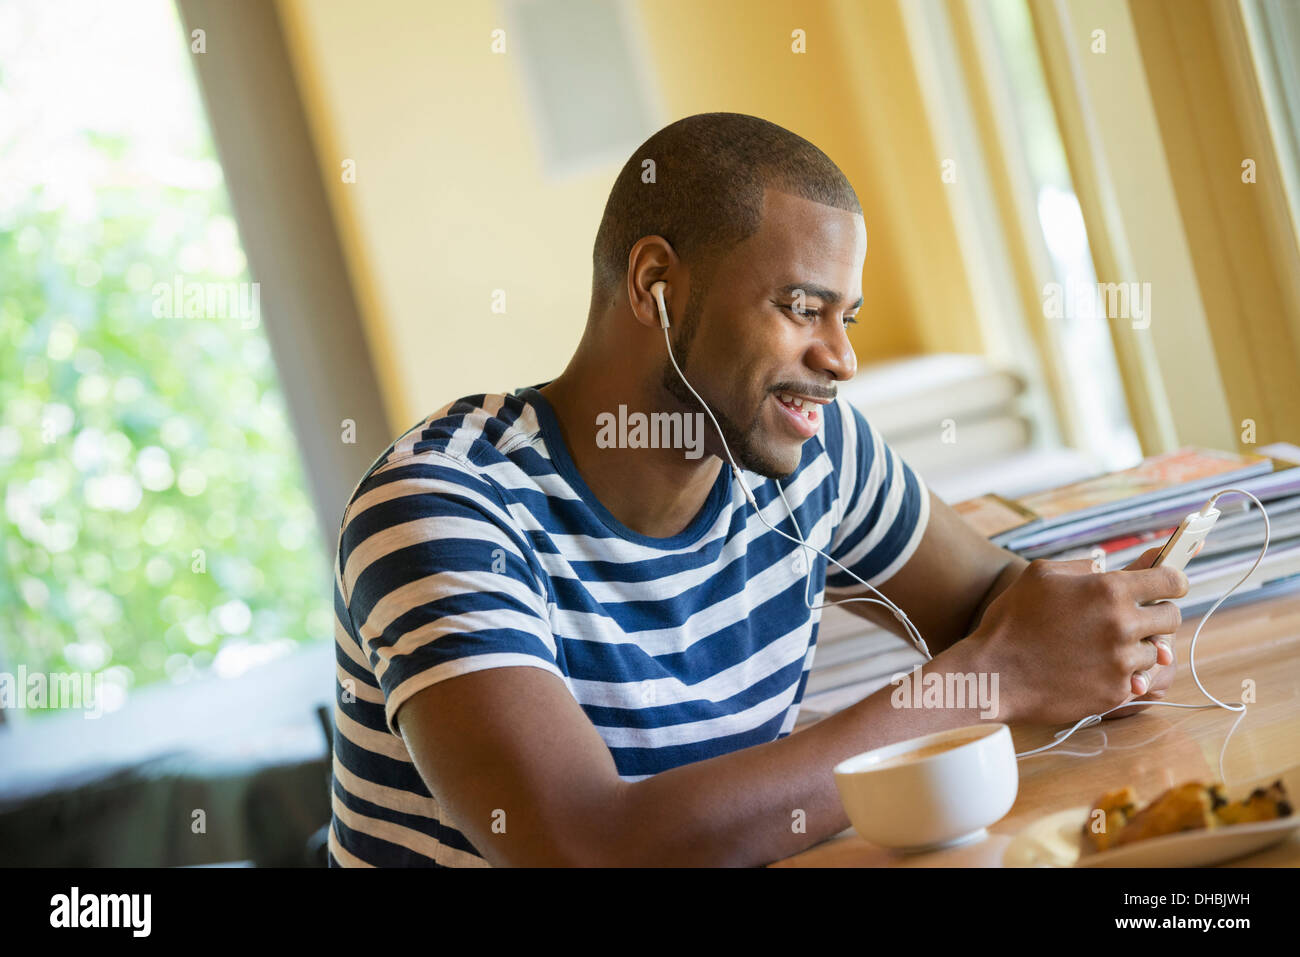 A man sitting in a cafe, having a cup of coffee, listening to music with headphones. Stock Photo